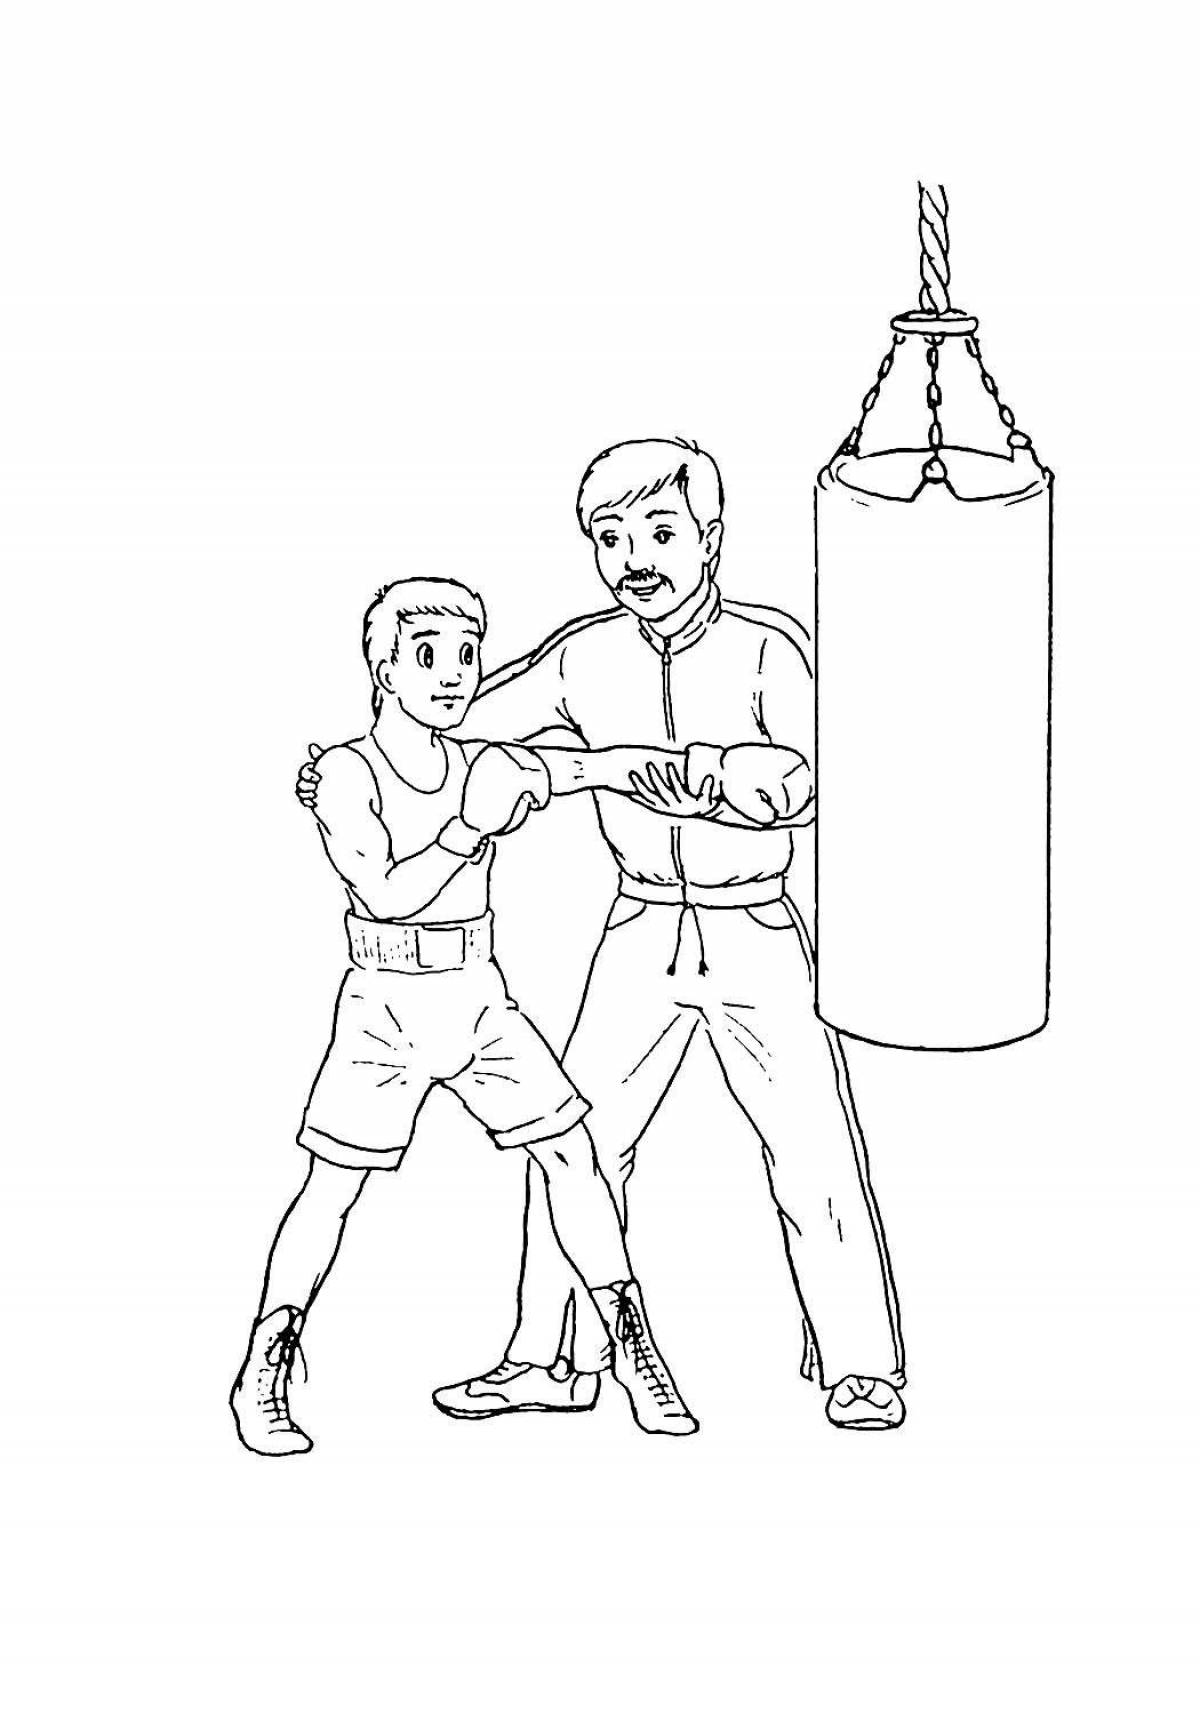 Fabulous boxing and boo coloring book